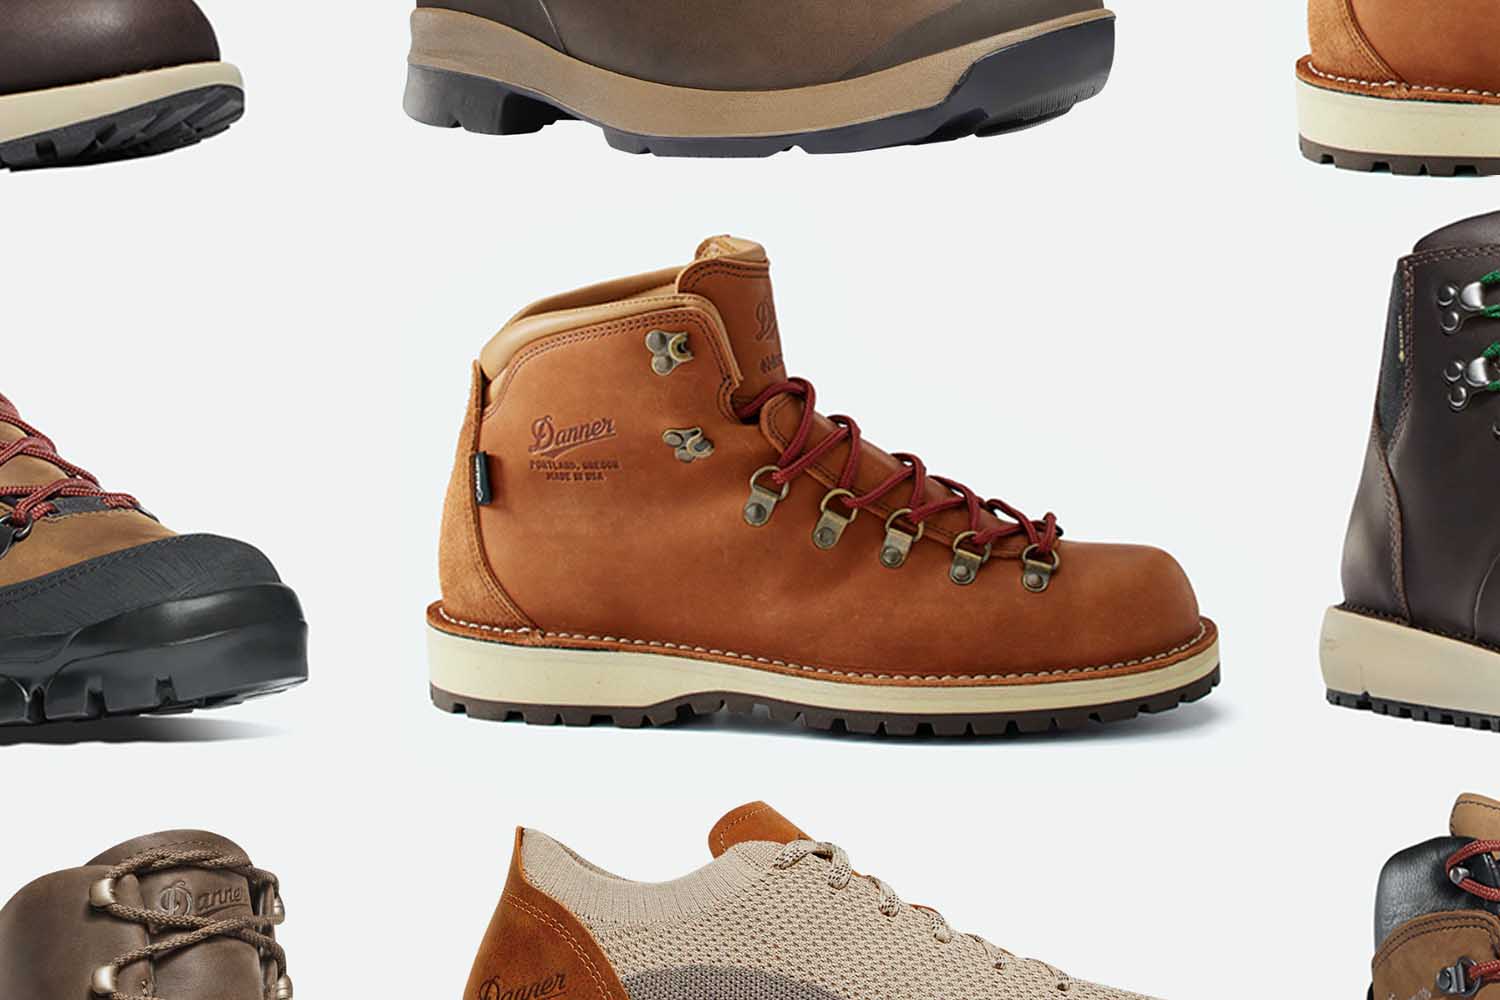 Deal: Save Up to 25% On Adventure-Ready Danner Hiking Boots